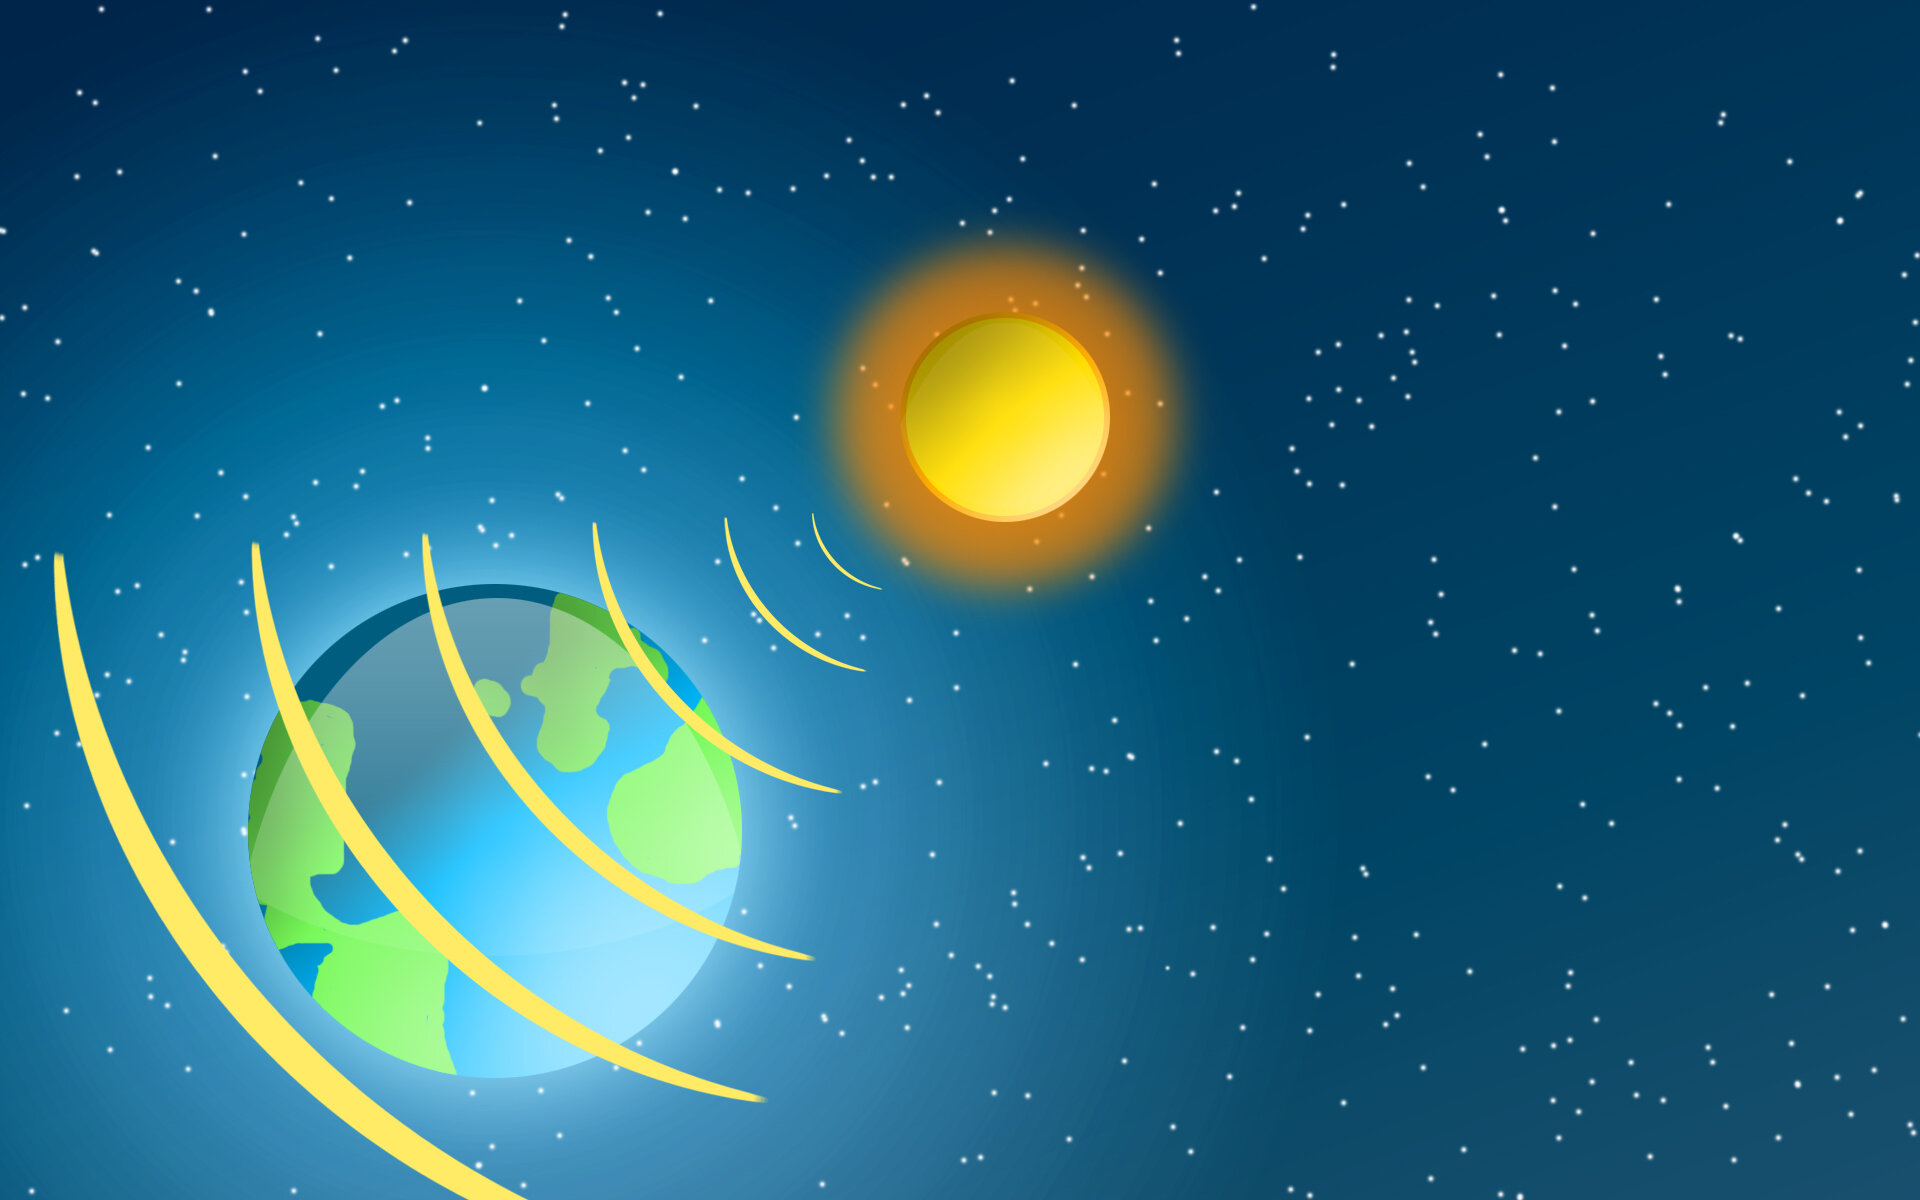 SSA: Space weather